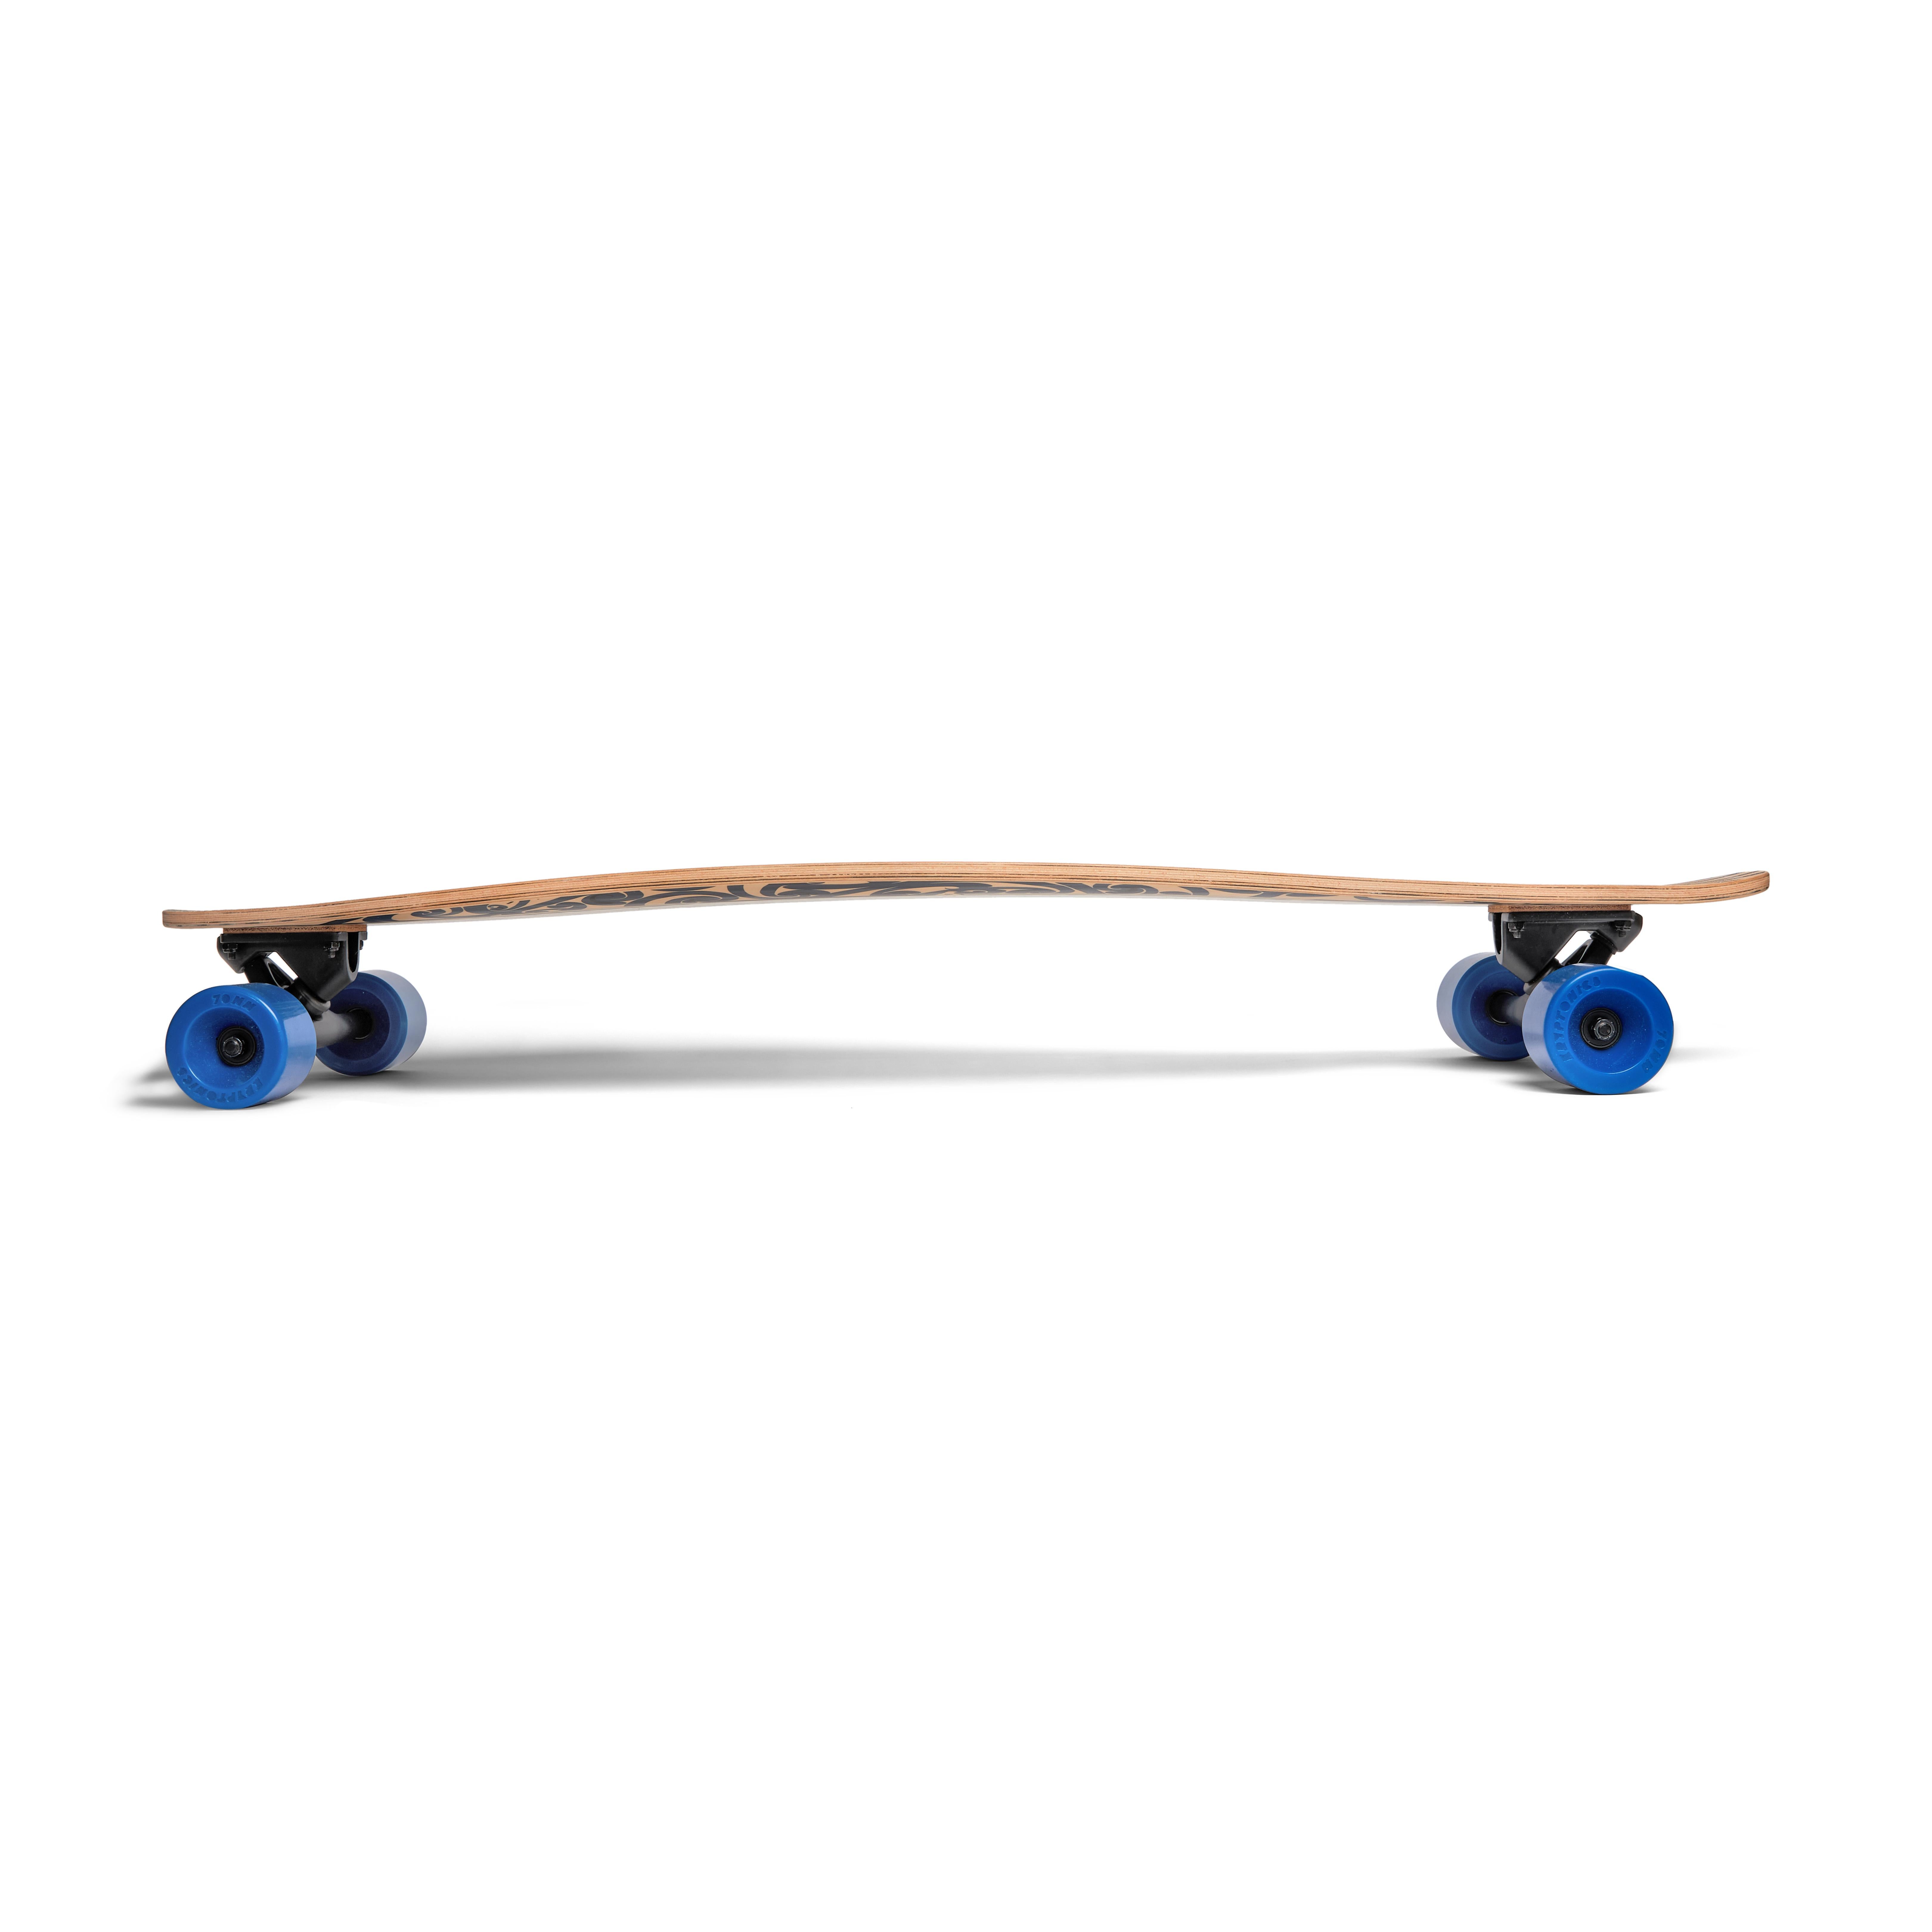 Hermès made their foray into the world of skate culture with a line of skate -and longboards that featured archival designs from the house. The beech wood limited edition board has a maple wood veneer and is in pristine condition. Use this longboard